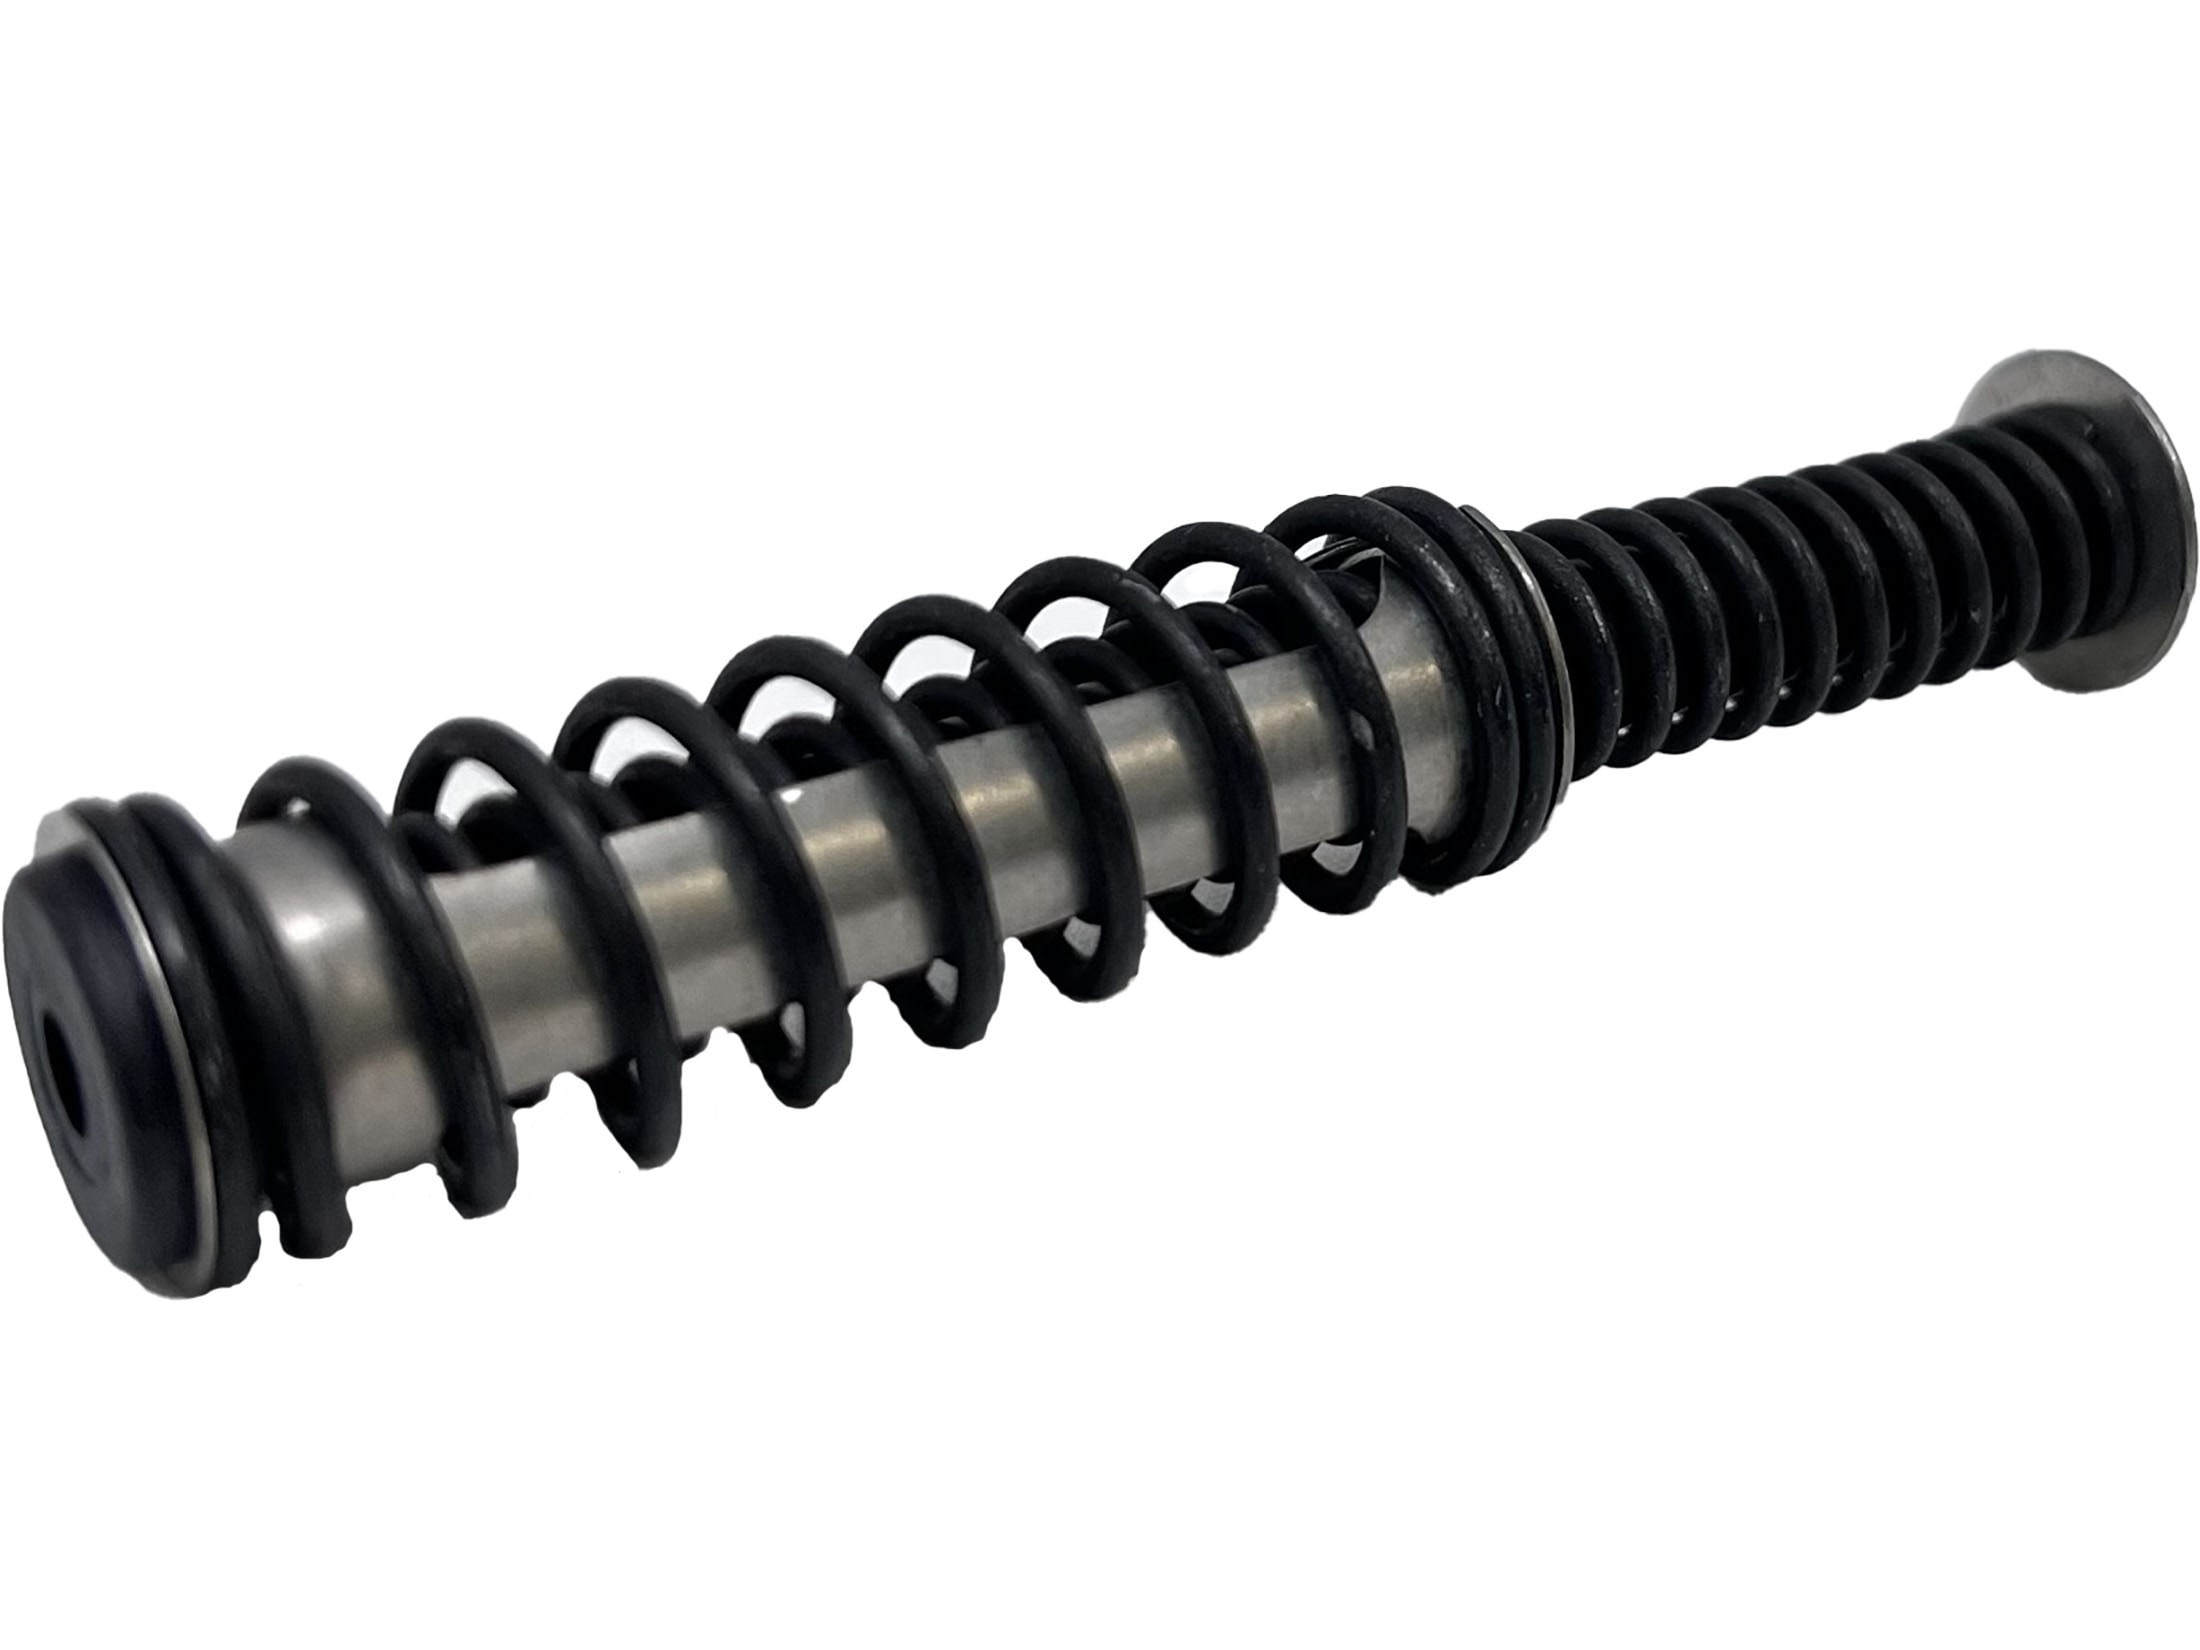 Glock Factory Guide Rod Recoil Spring Assembly Glock 29, 29SF, 30